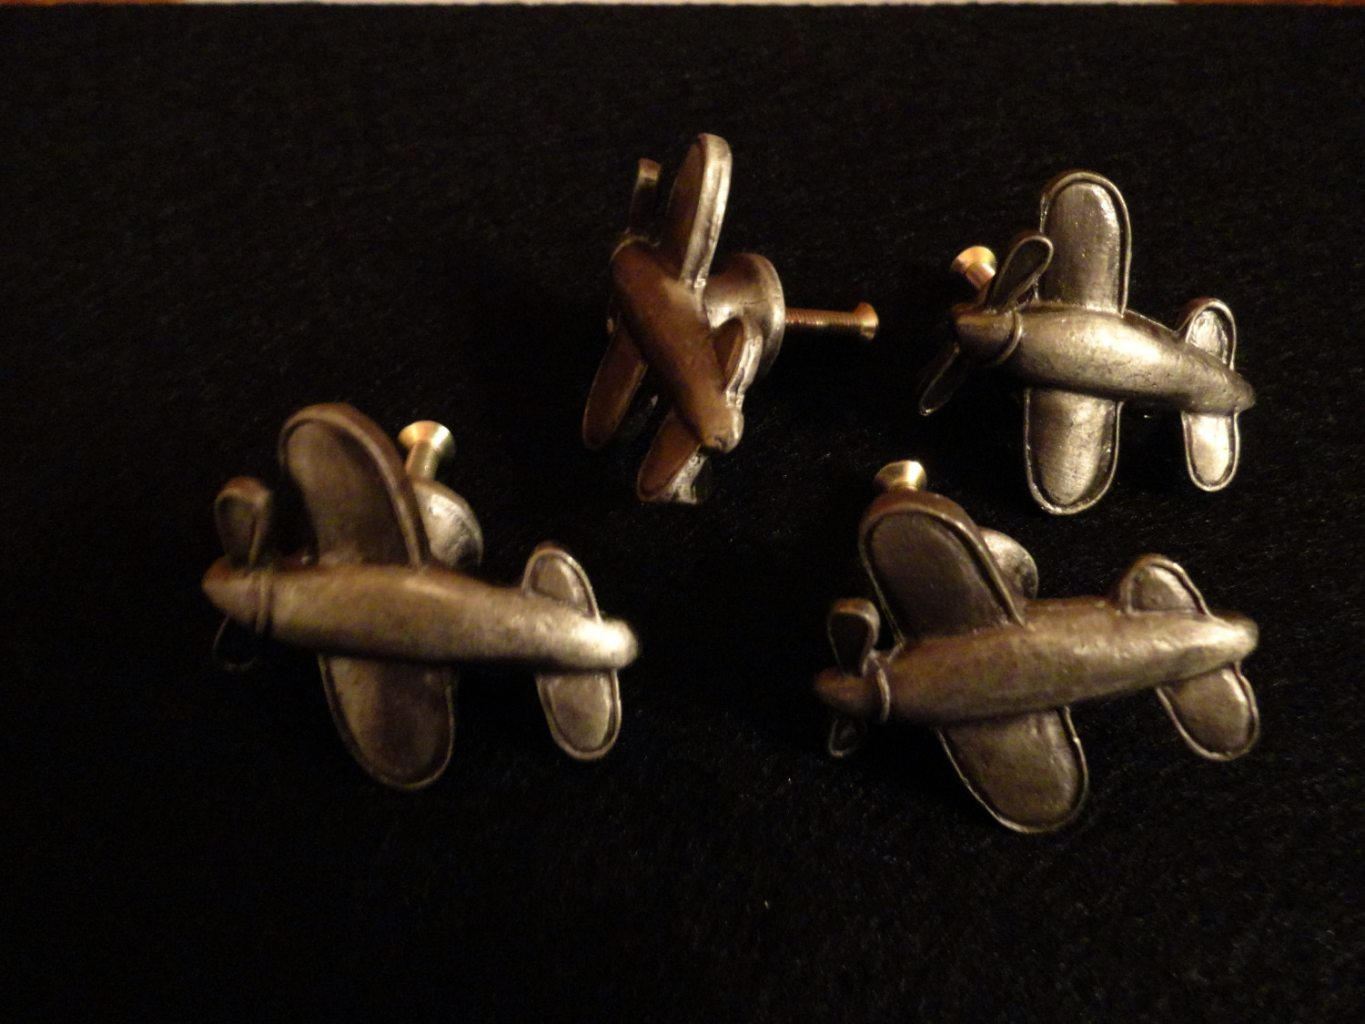 Airplane Drawer Pulls Talktostrangersguide intended for size 1365 X 1024